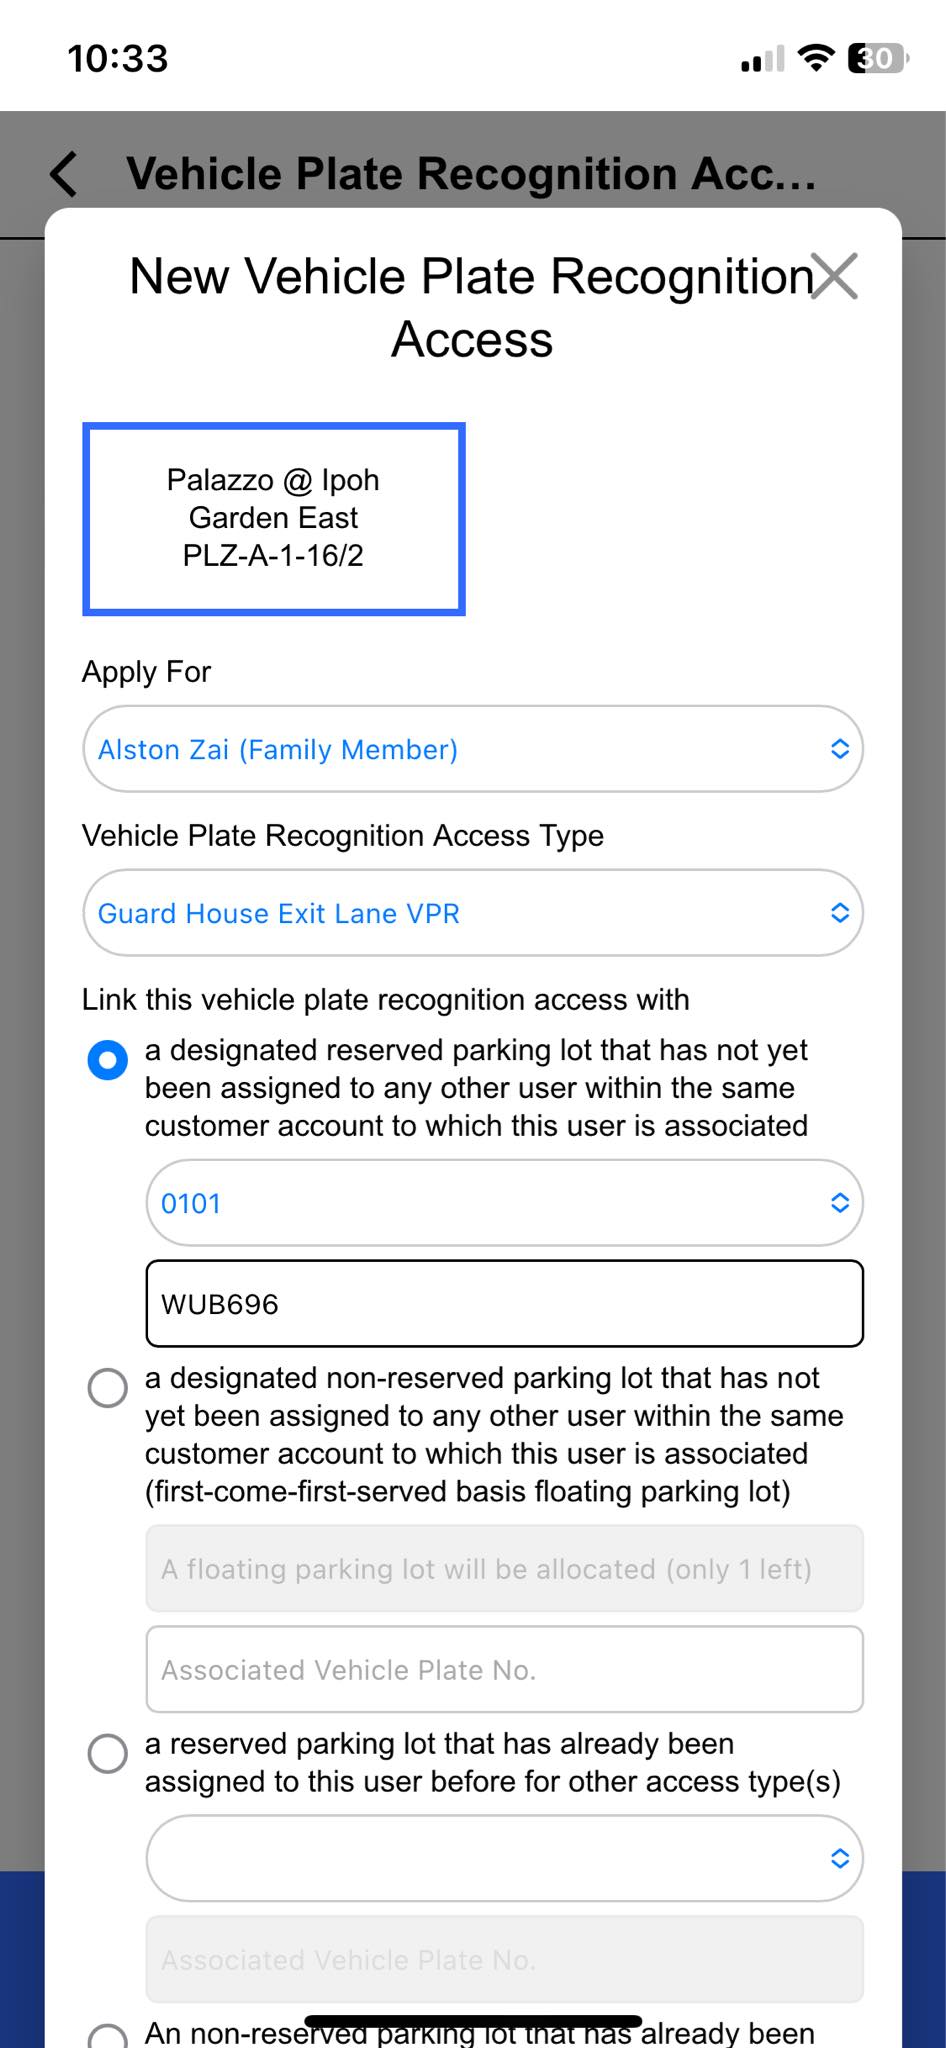 Vehicle Plate Recognition Access App Screenshot